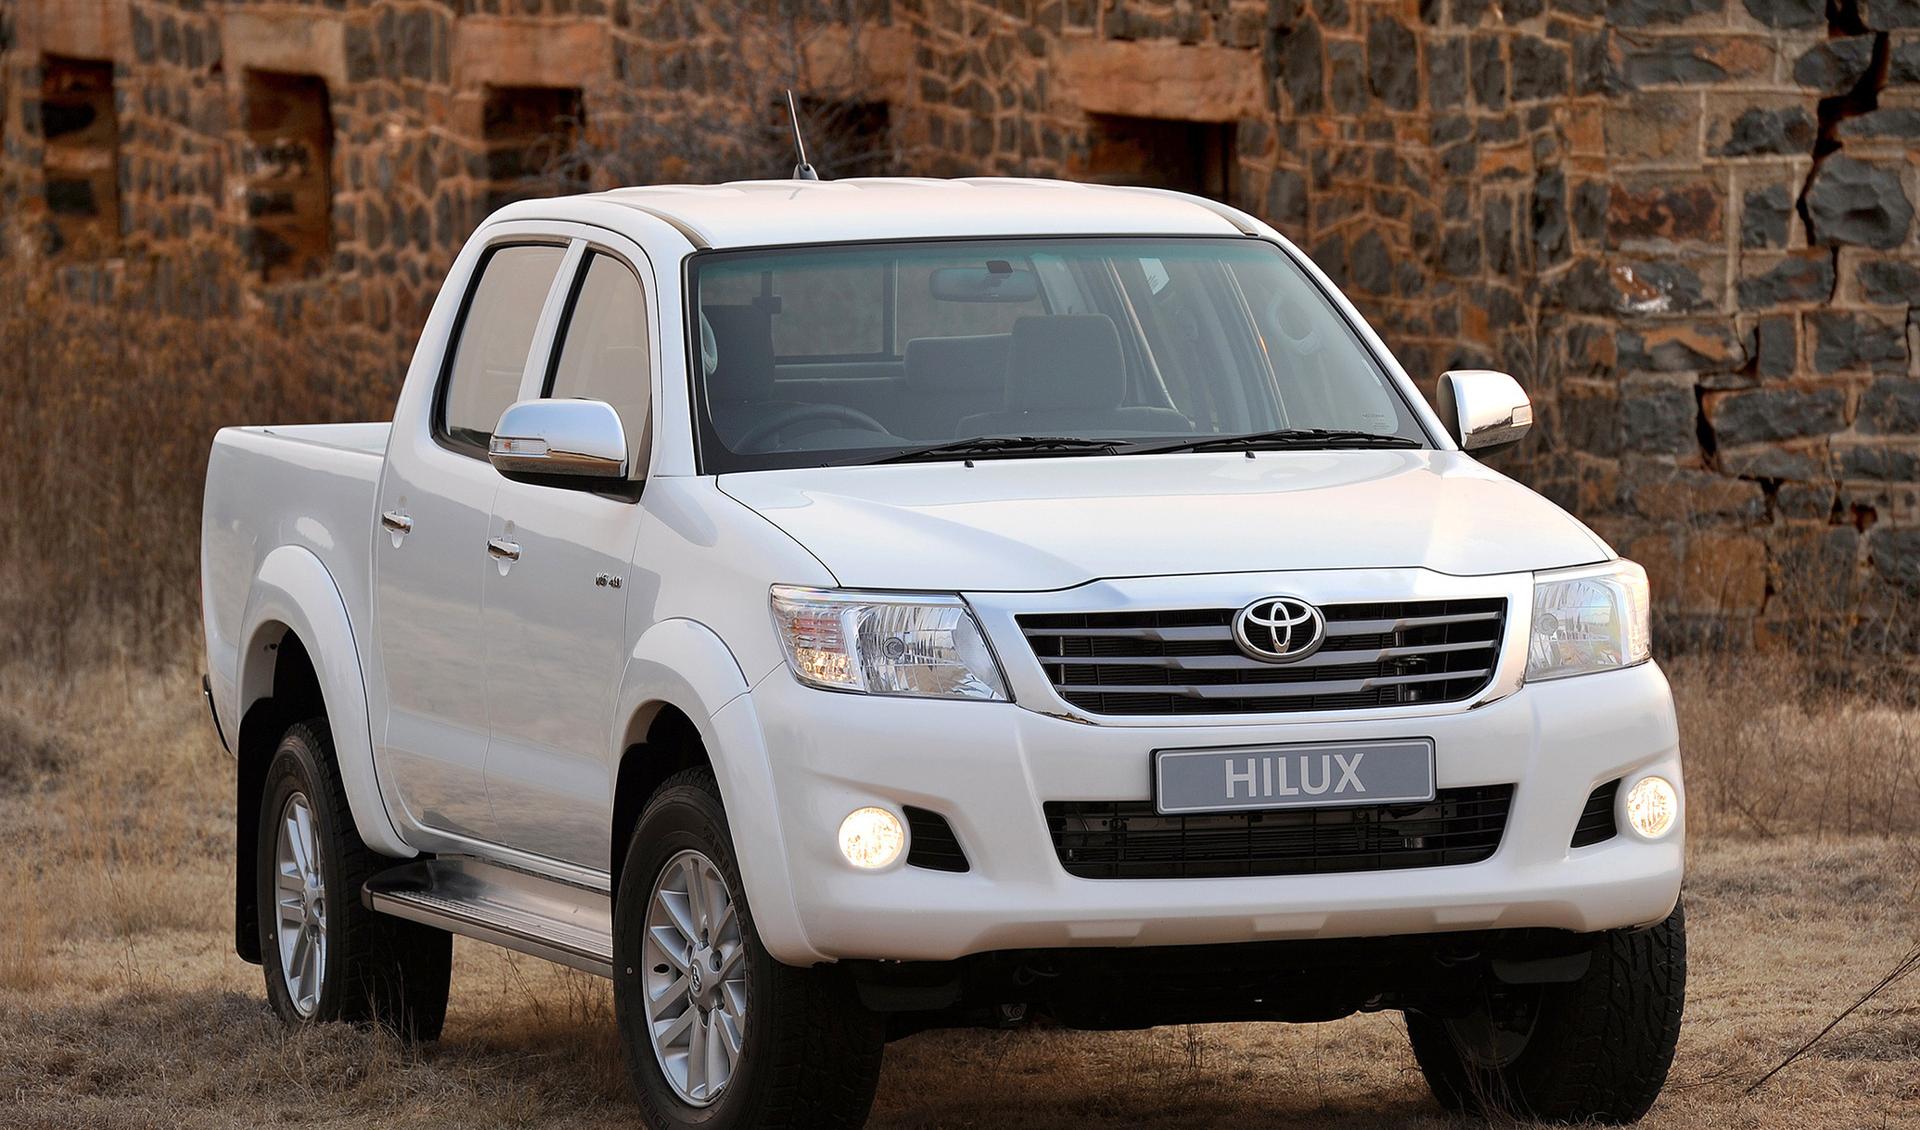 Toyota Hilux Wallpapers HD Download